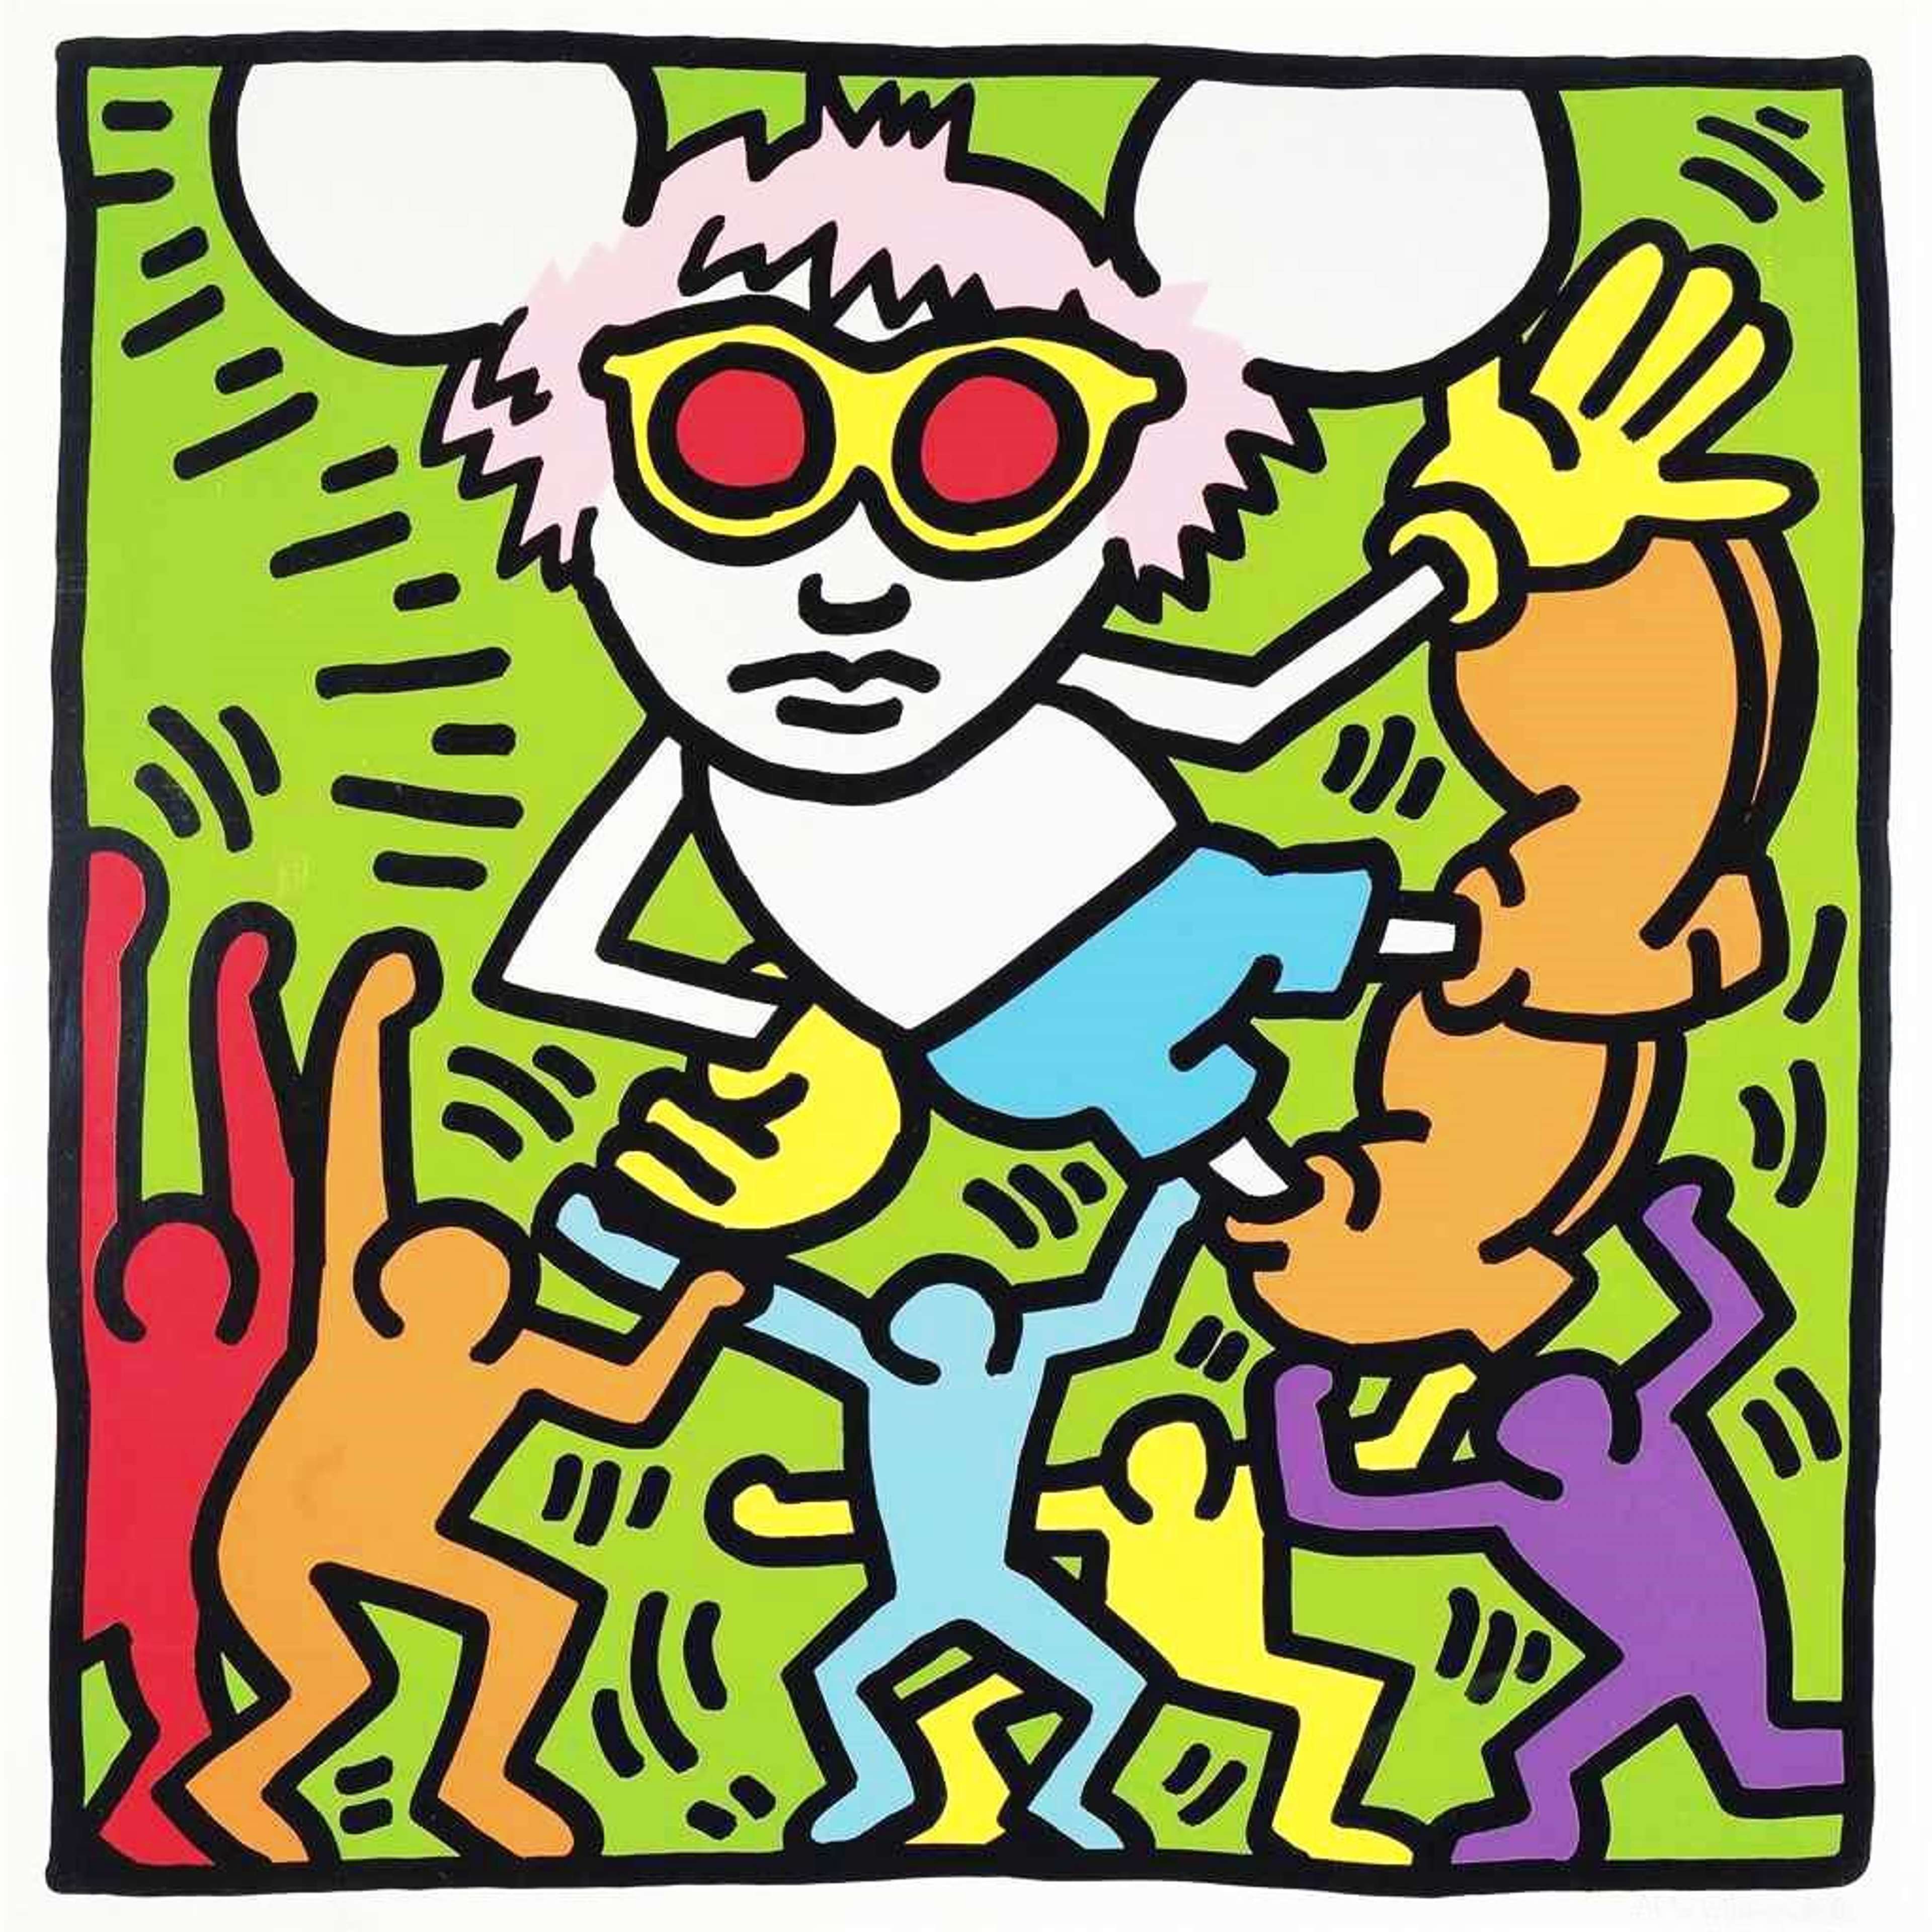 A Seller’s Guide To Keith Haring